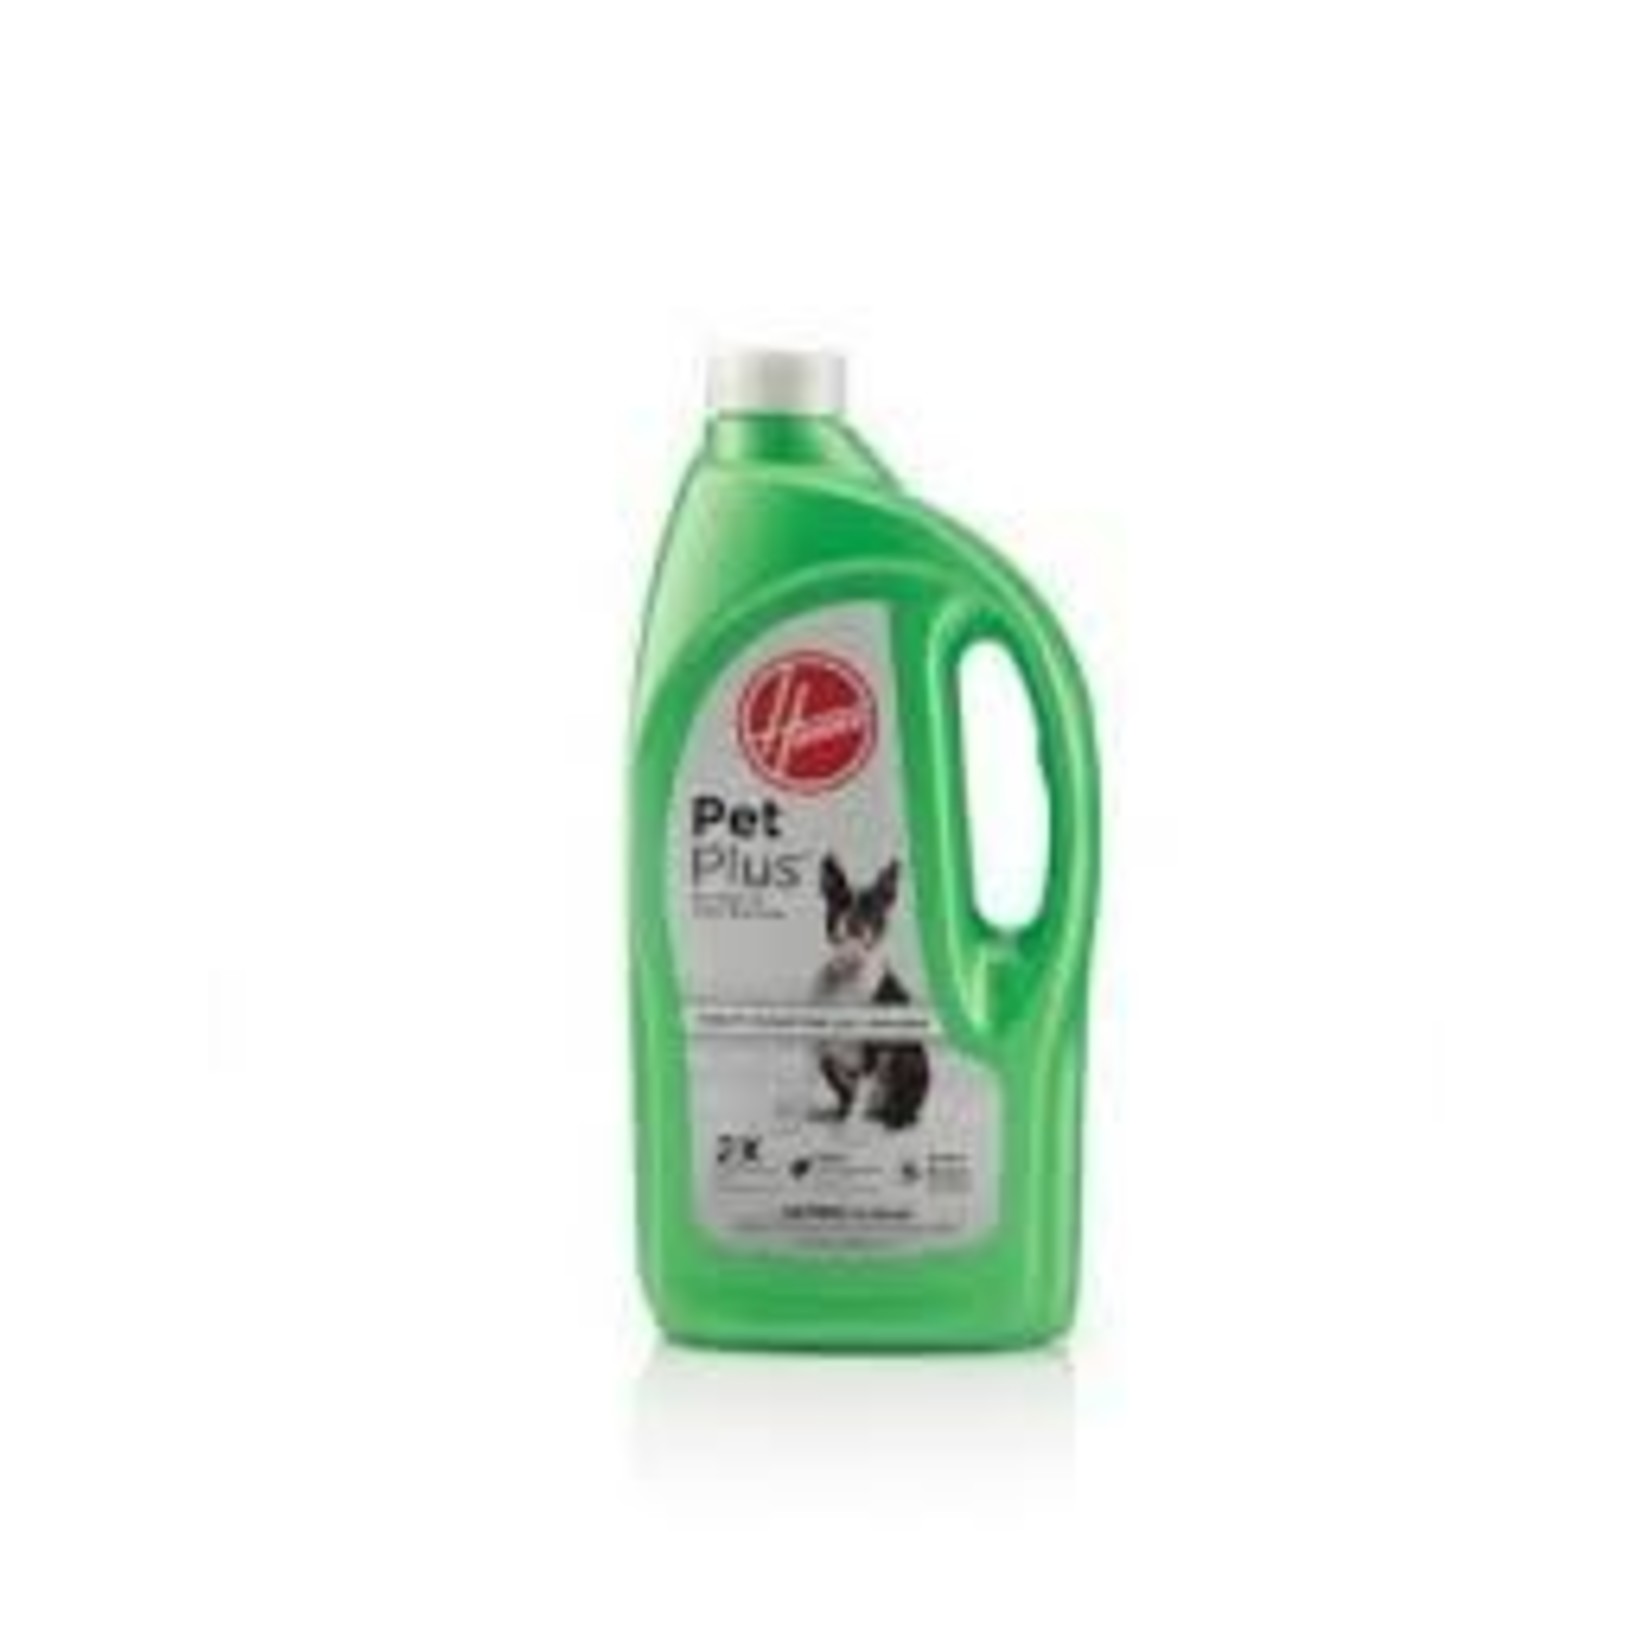 Hoover Hoover Pet Plus Shampoo Concentrate **No Longer Available**